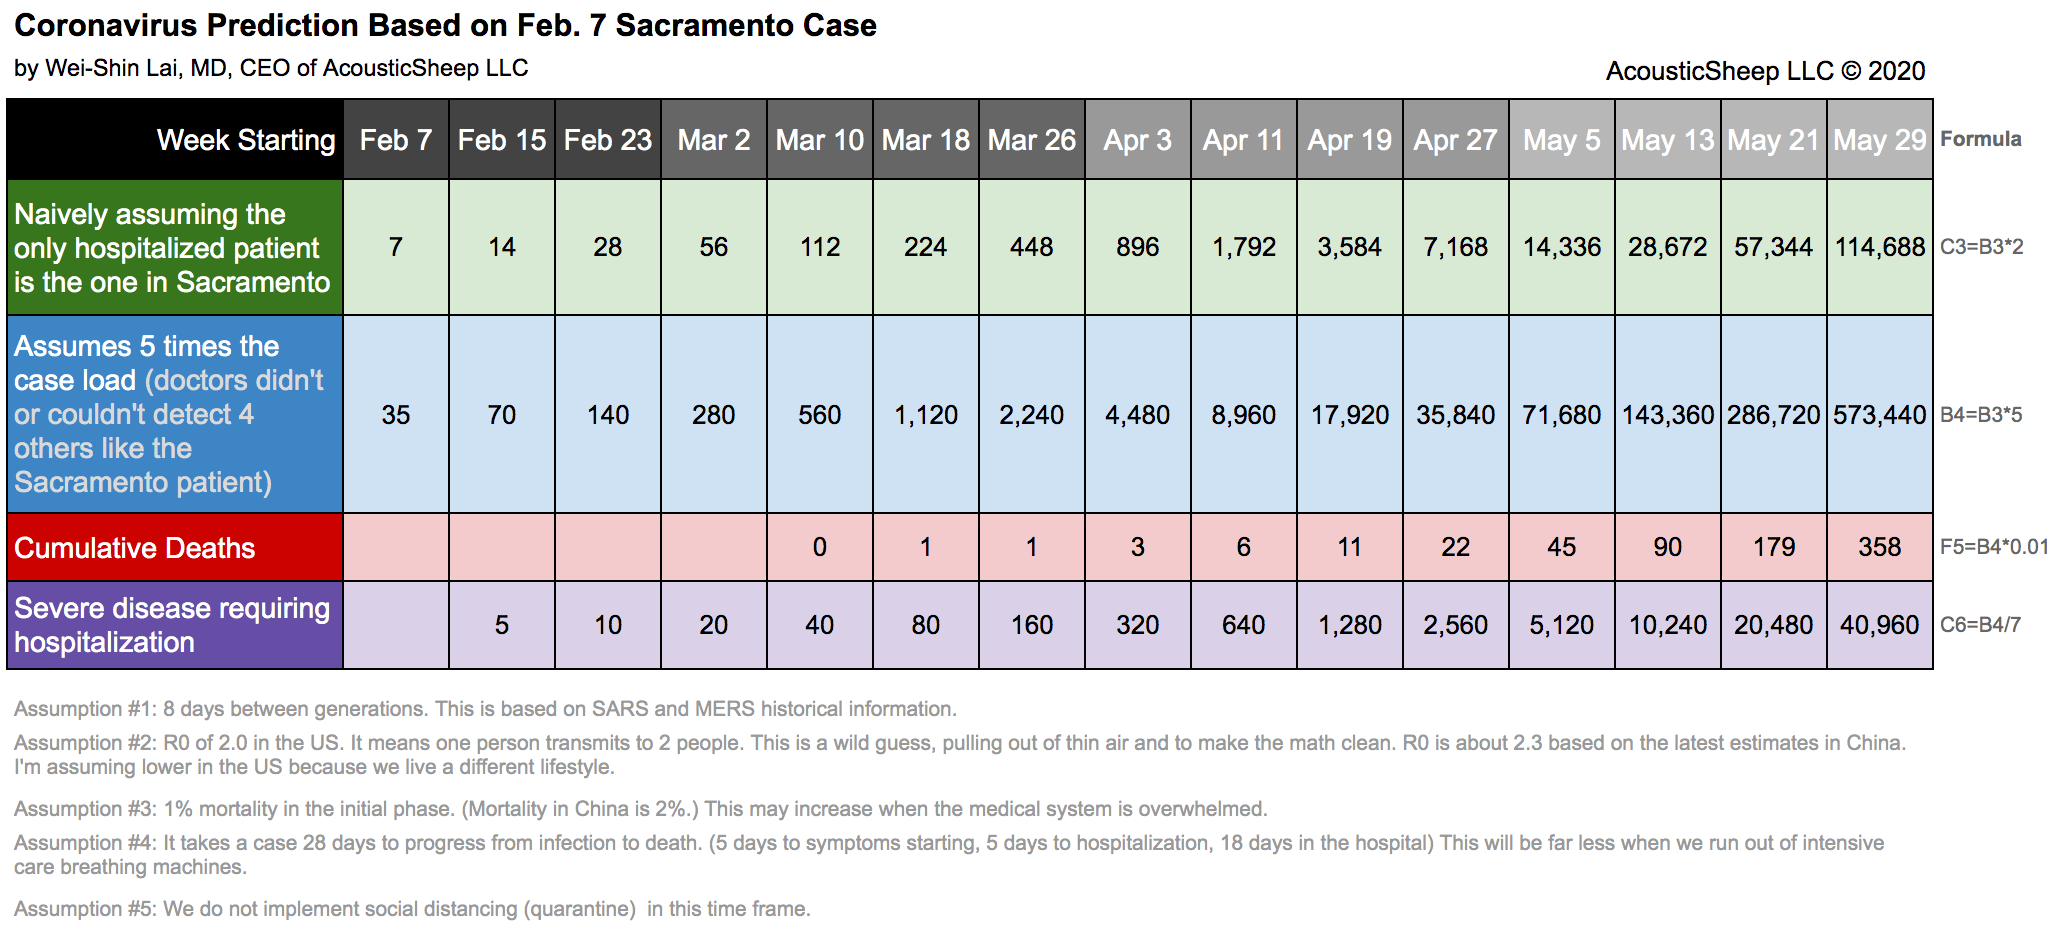 Coronavirus Prediction Chart Based on February 7th Sacramento Case. Including hospitalizations, undetected cases, cumulative deaths, and severe cases of the Coronavirus